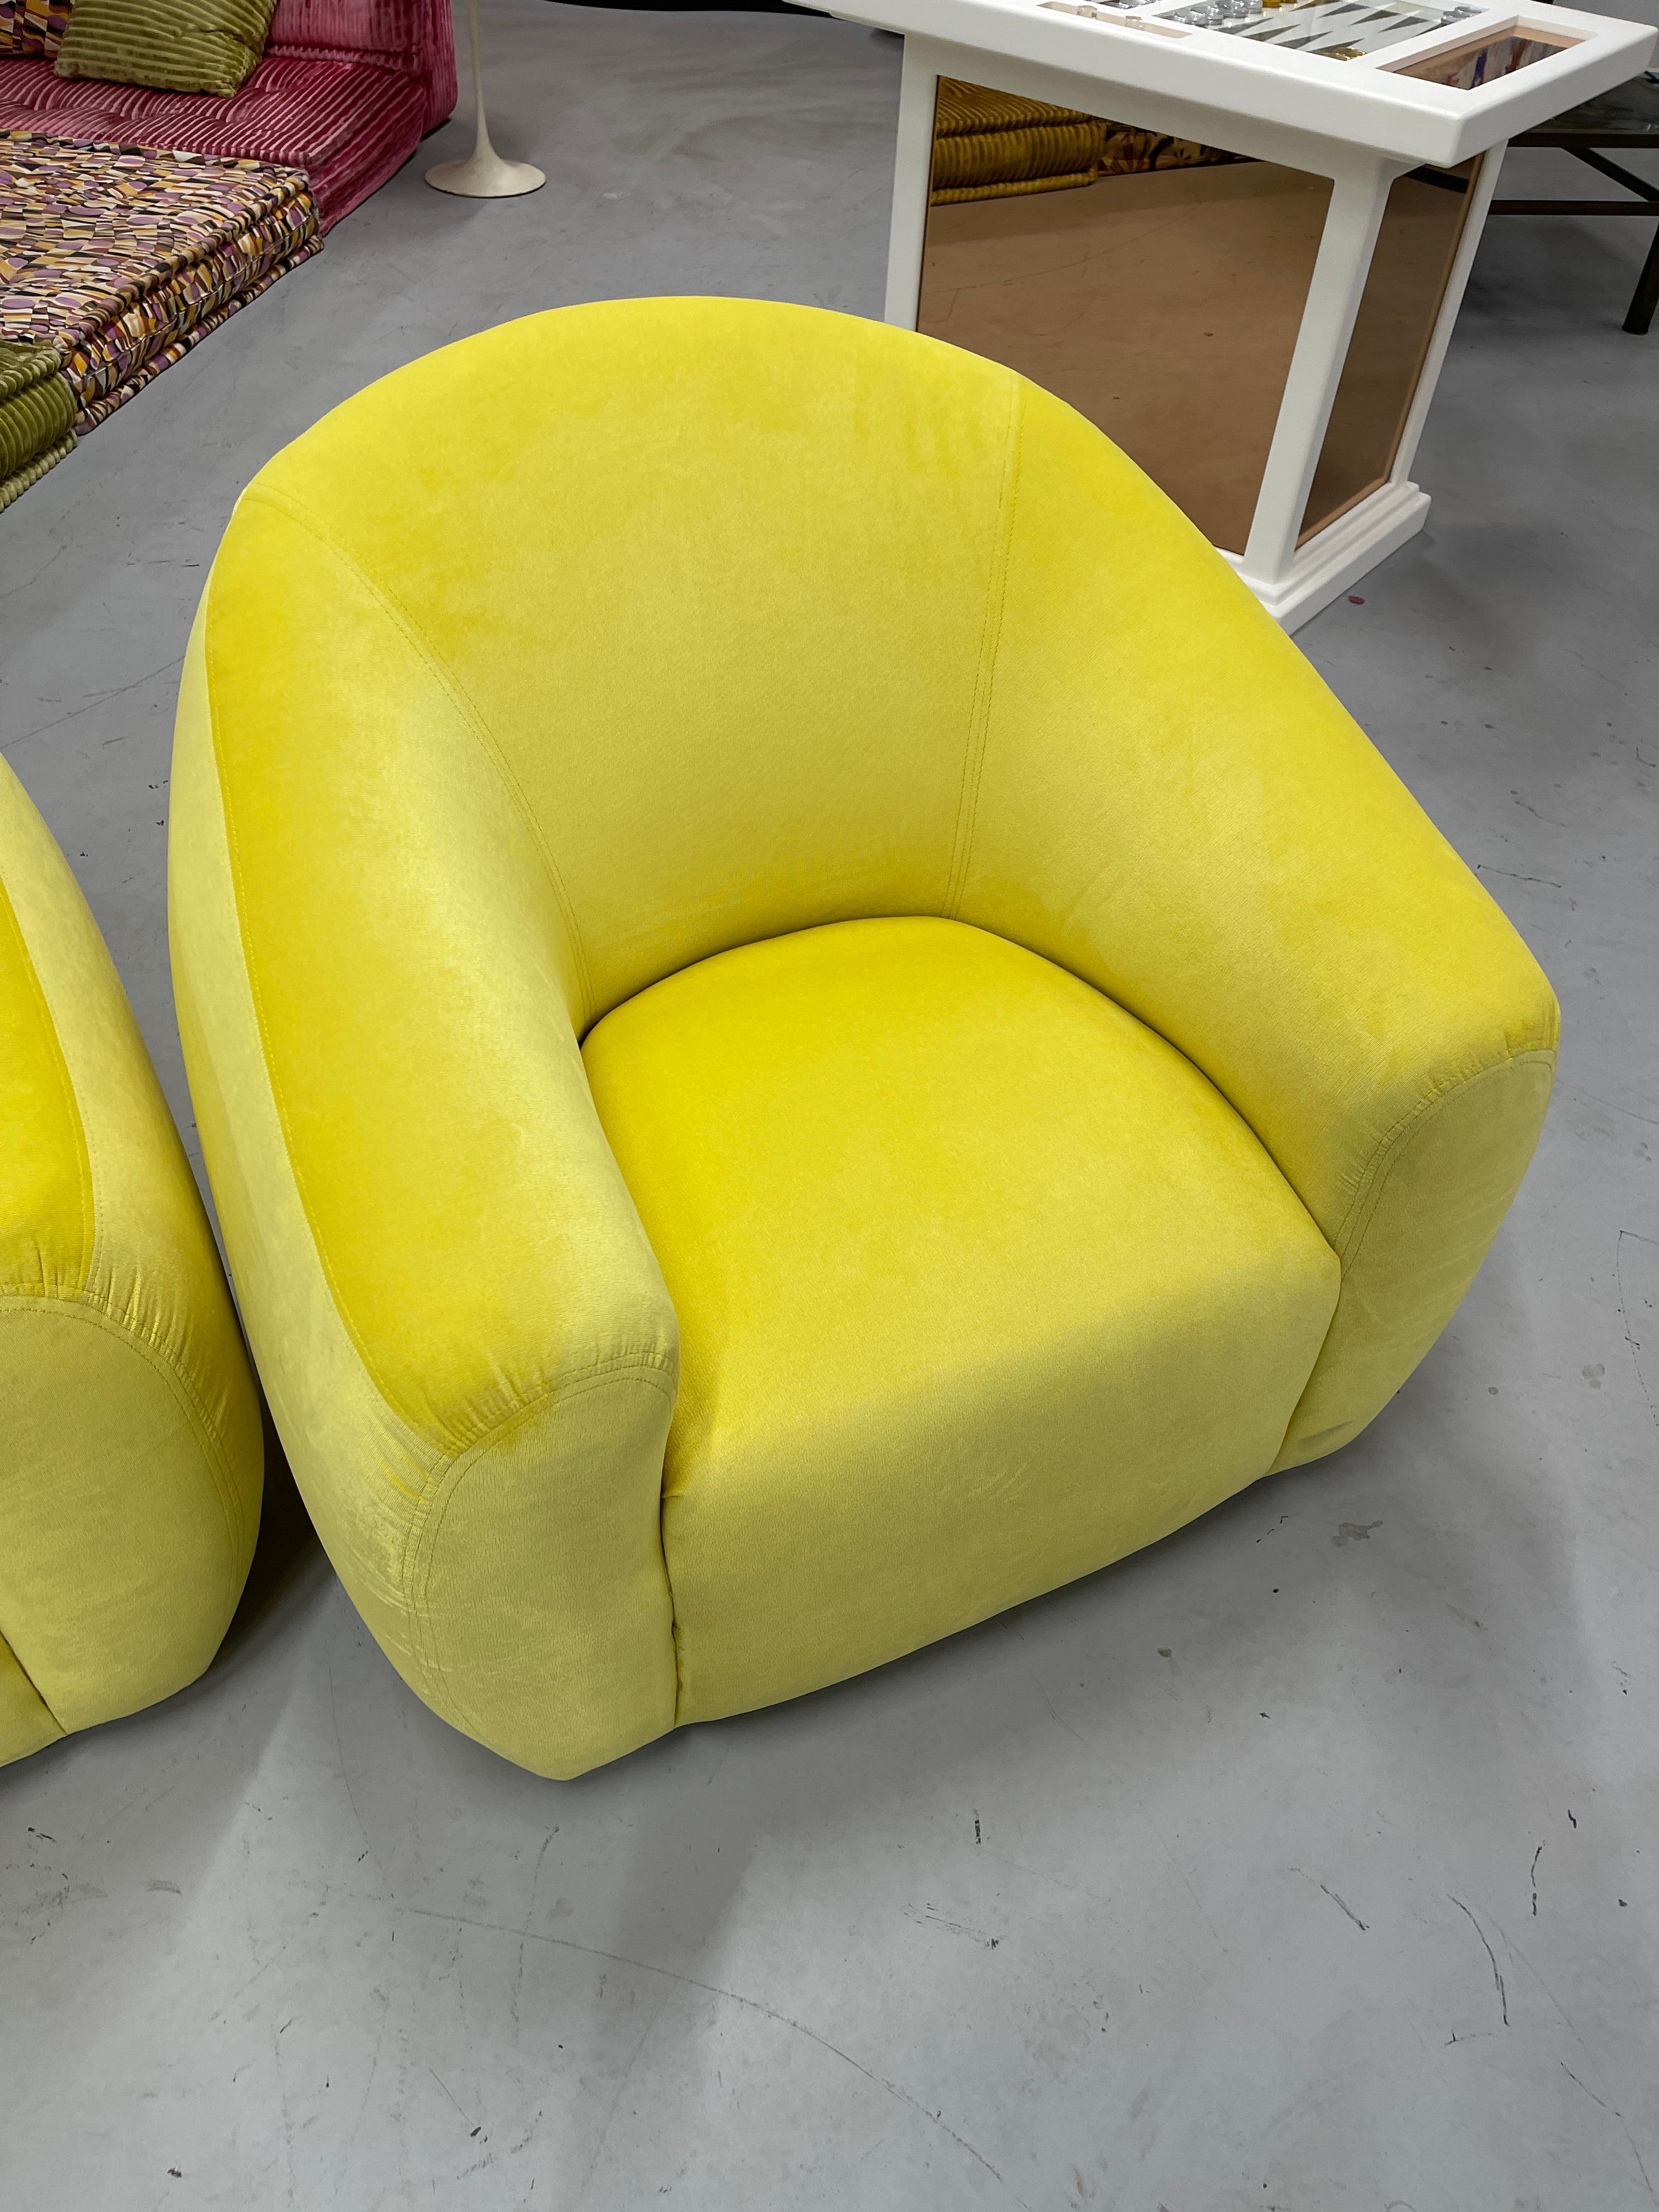 A Rudin Swivel Chairs in Limon Kravet Fabric 6